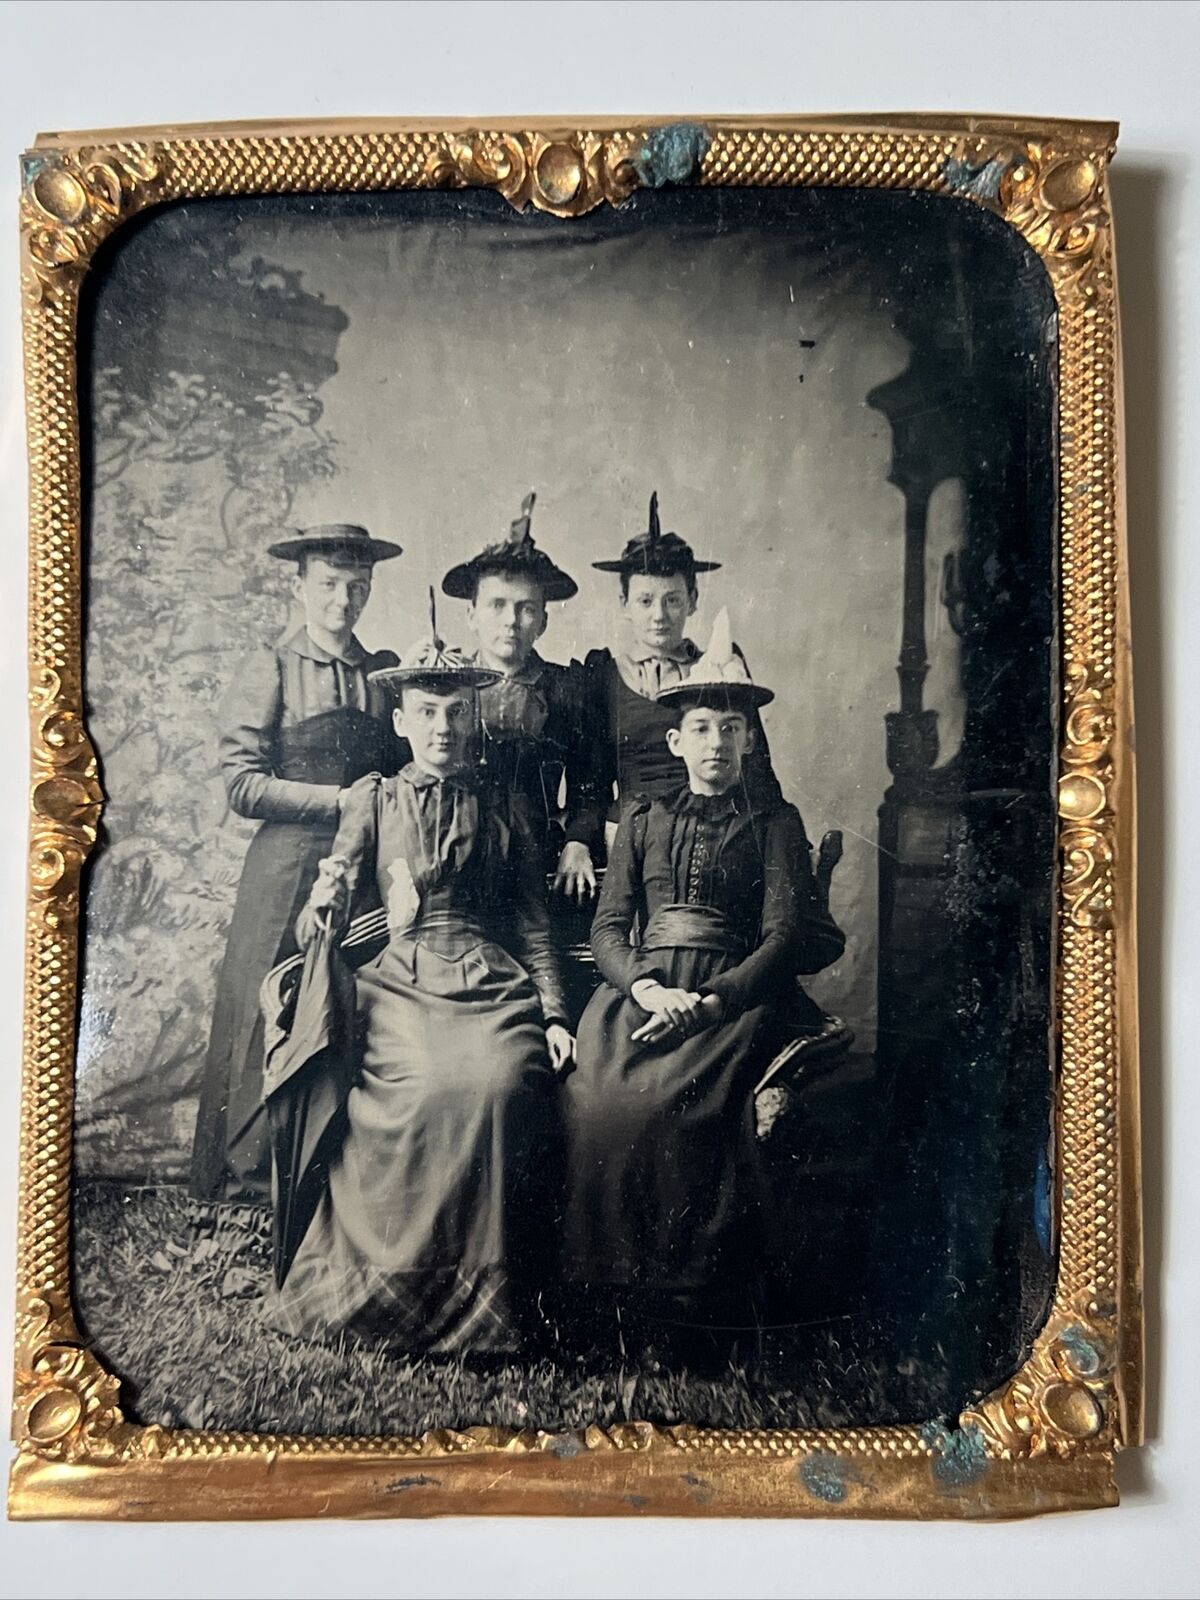 STRANGE antique 1870s Tintype Photo 5 Women Witch Type Pointy Hats COPPER FRAME